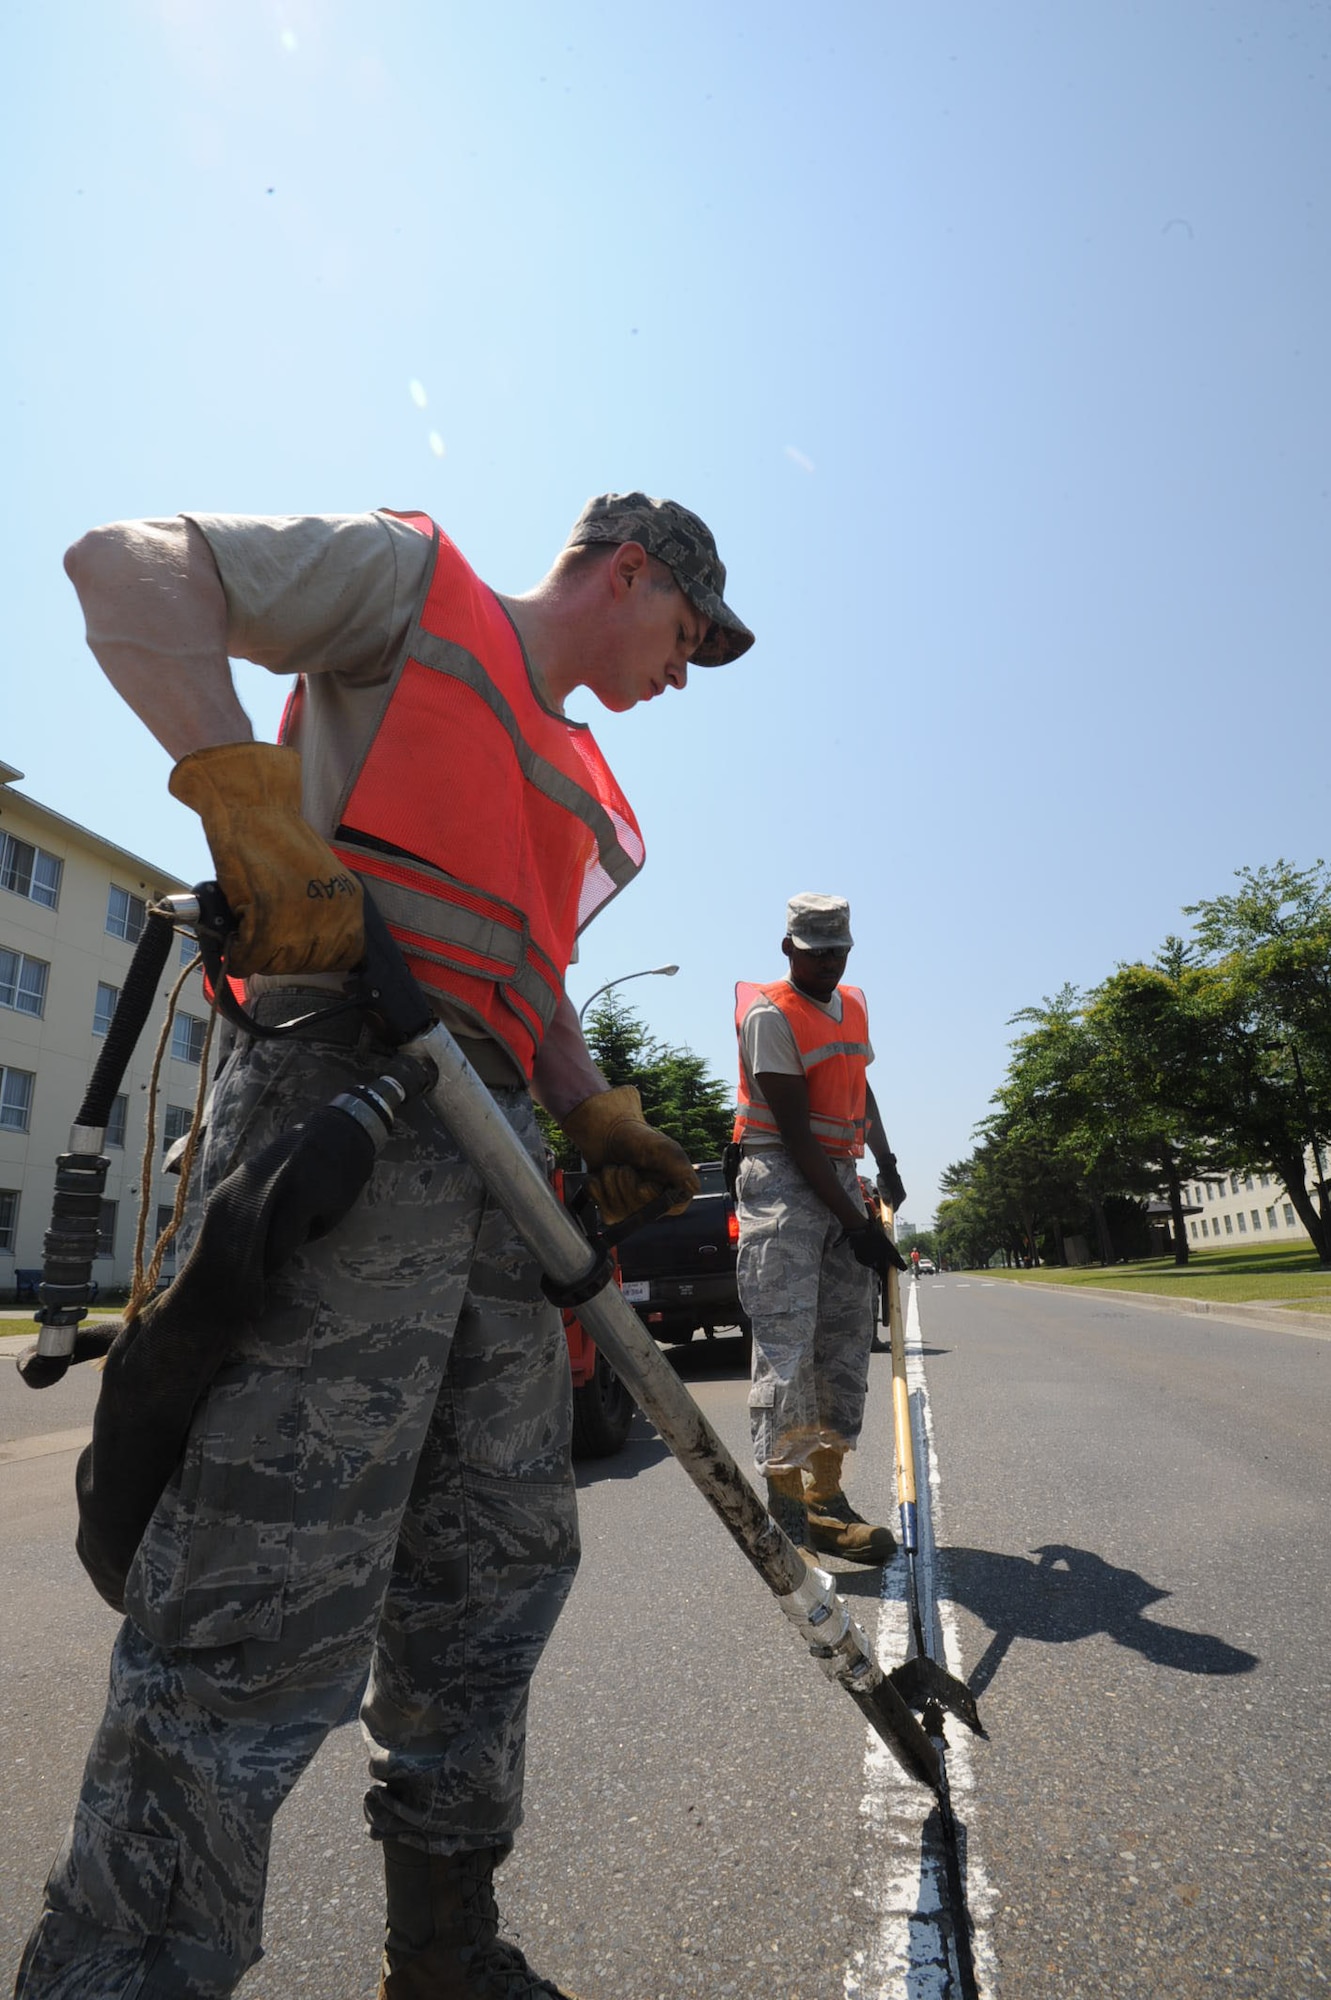 U.S. Air Force Staff Sgt. Paul Head, front, and Senior Airman Clifford Weston, 35th Civil Engineer Squadron pavement and construction shop members, apply hot asphalt sealant in cracks on Freedom Drive at Misawa Air Base, Japan, June 27, 2012. The hot asphalt sealant is heated up to 300 degrees Fahrenheit prior to application to roads. The sealant may take up to four hours to cool. (U.S. Air Force photo by Airman 1st Class Kenna Jackson/Released)